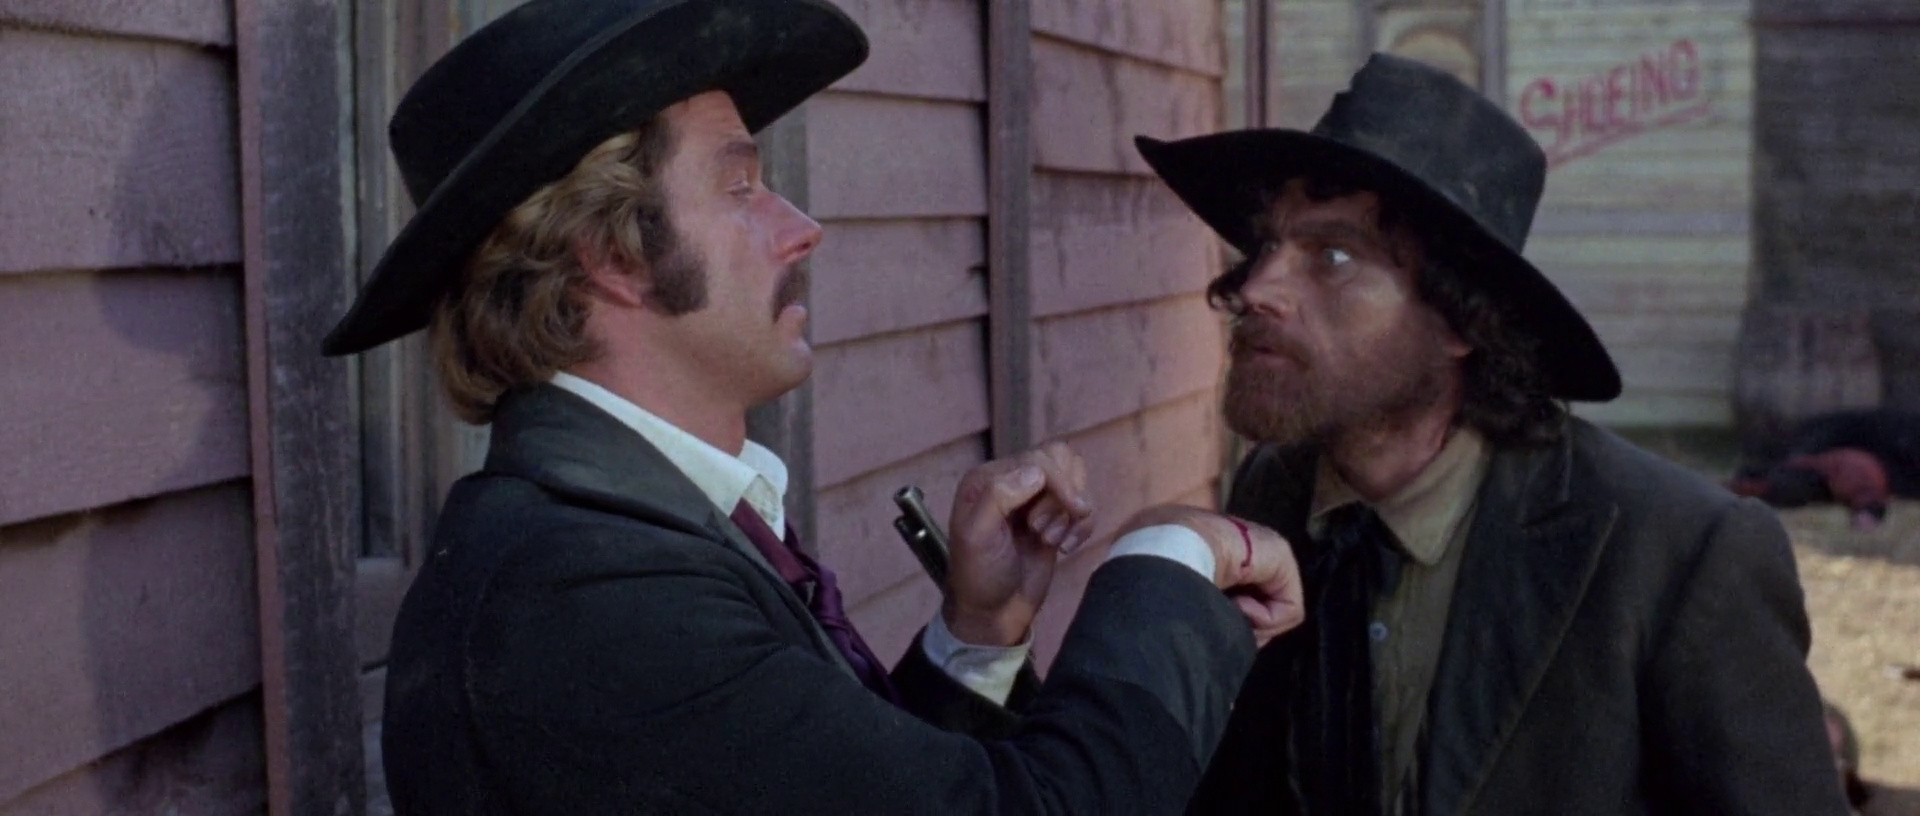 Jesse & Lester - Two Brothers in a Place Called Trinity (1972) Screenshot 4 